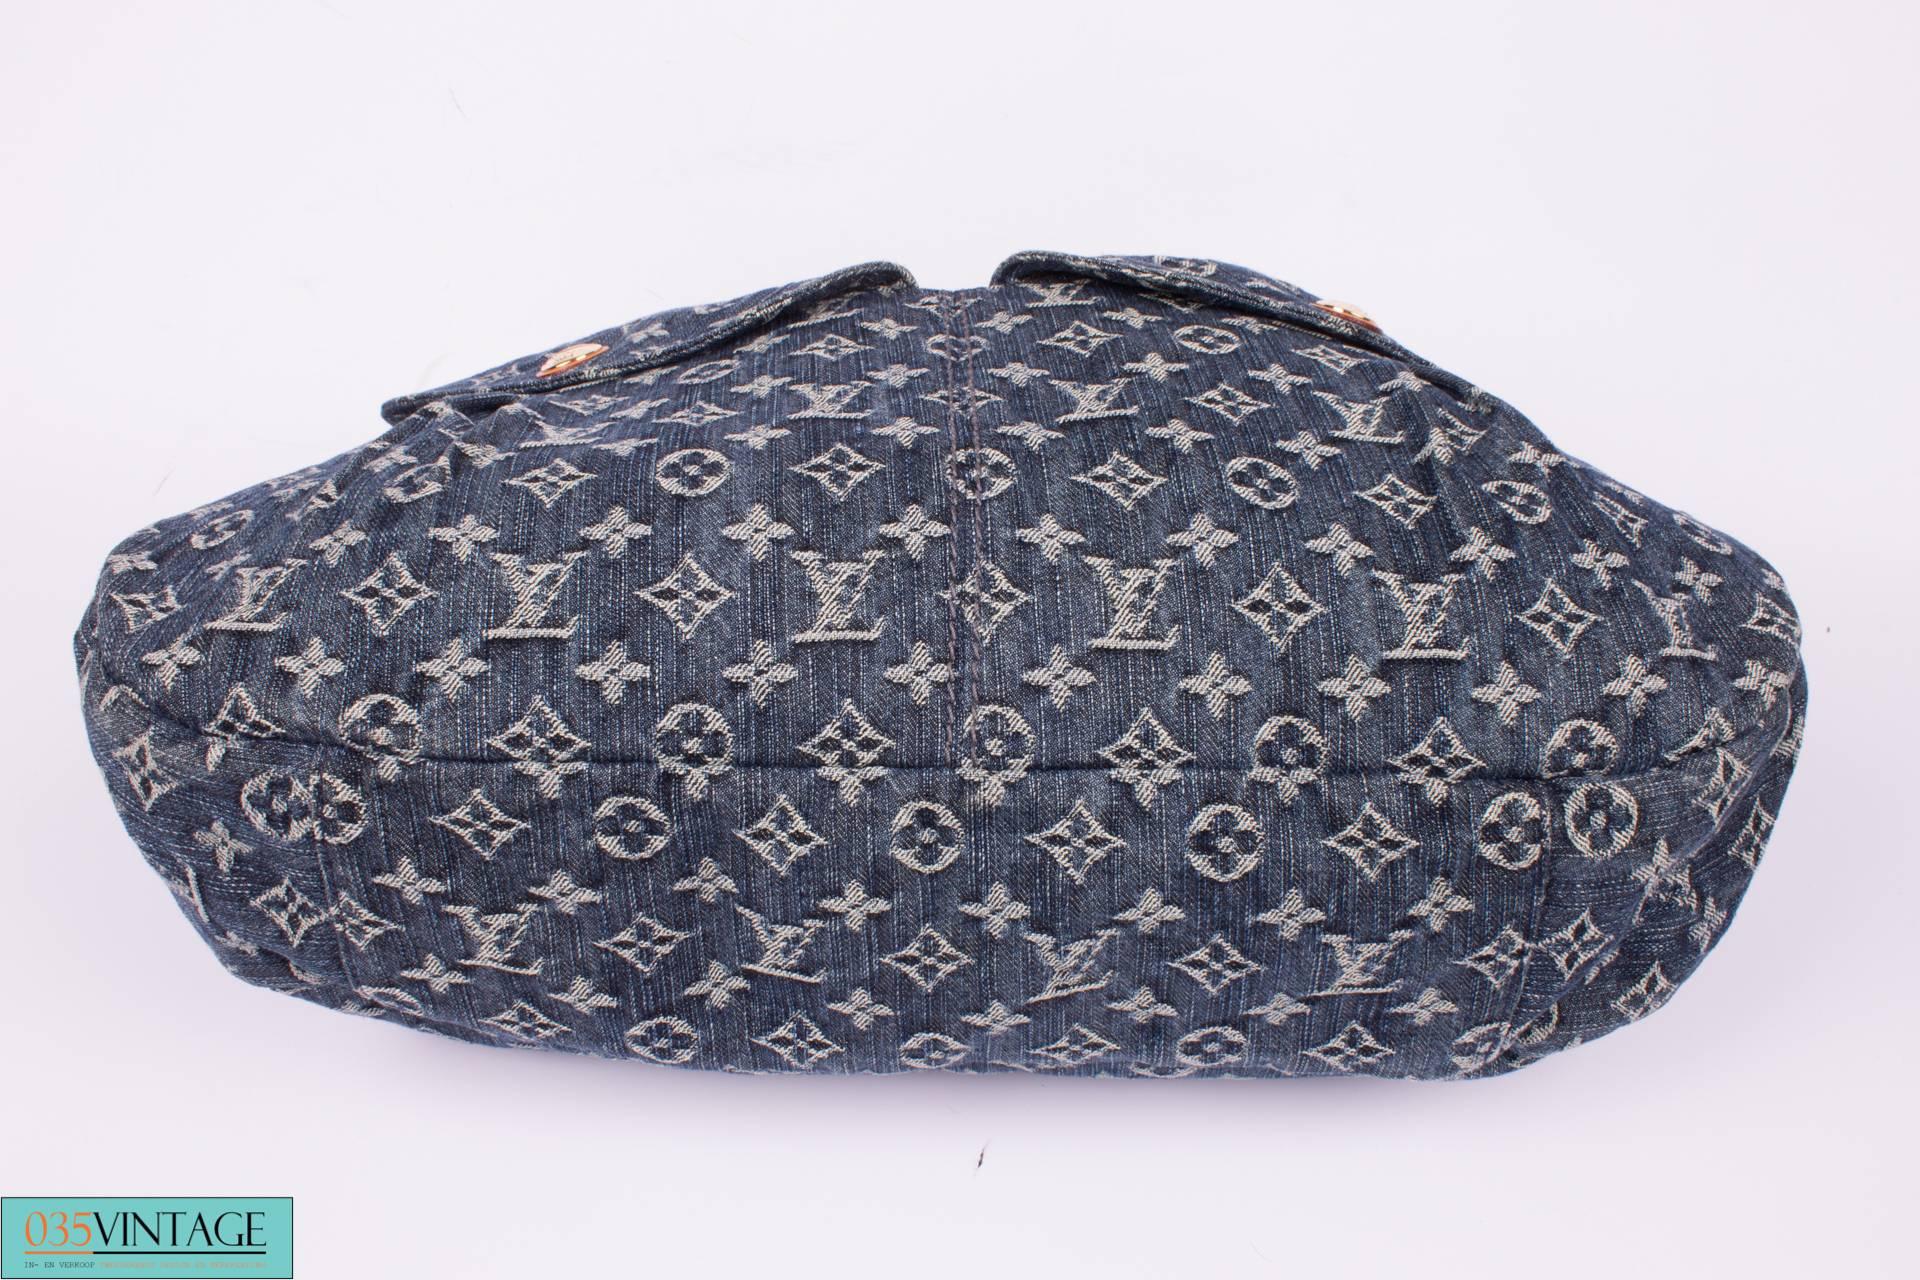 Nice and casual! The Louis Vuitton Denim Daily GM Bag. This one is BIG!!

Crafted in blue denim covered with LV monograms. Rounded corners, an adjustable leather schoulder strap and two large pockets with magnetic golden push buttons at the front.